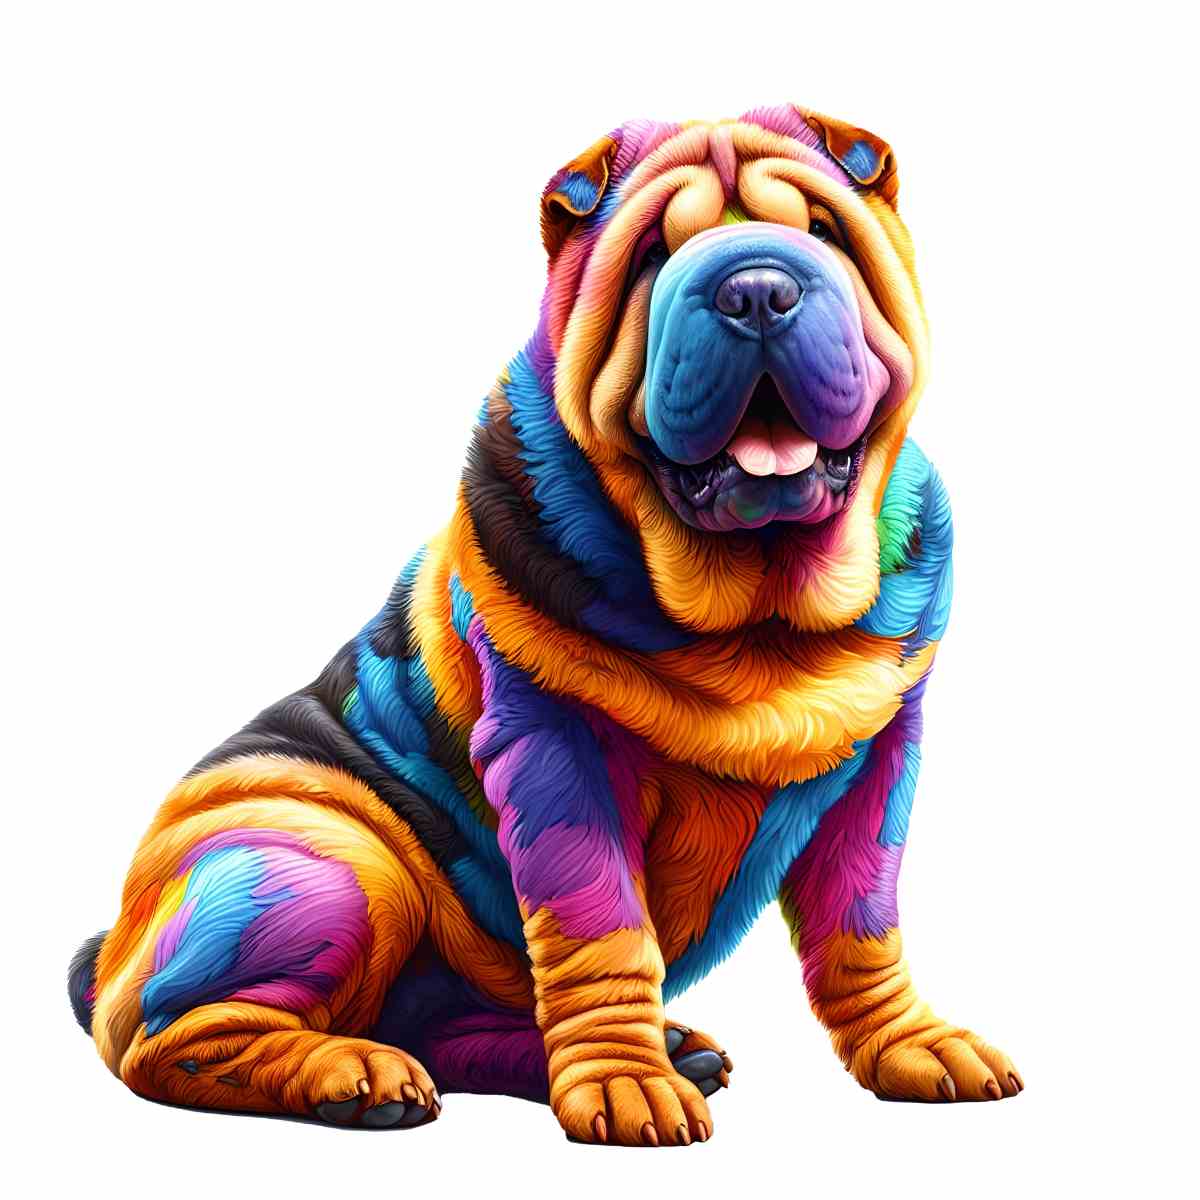 Animal Jigsaw Puzzle > Wooden Jigsaw Puzzle > Jigsaw Puzzle A4 Shar Pei Dog - Jigsaw Puzzle